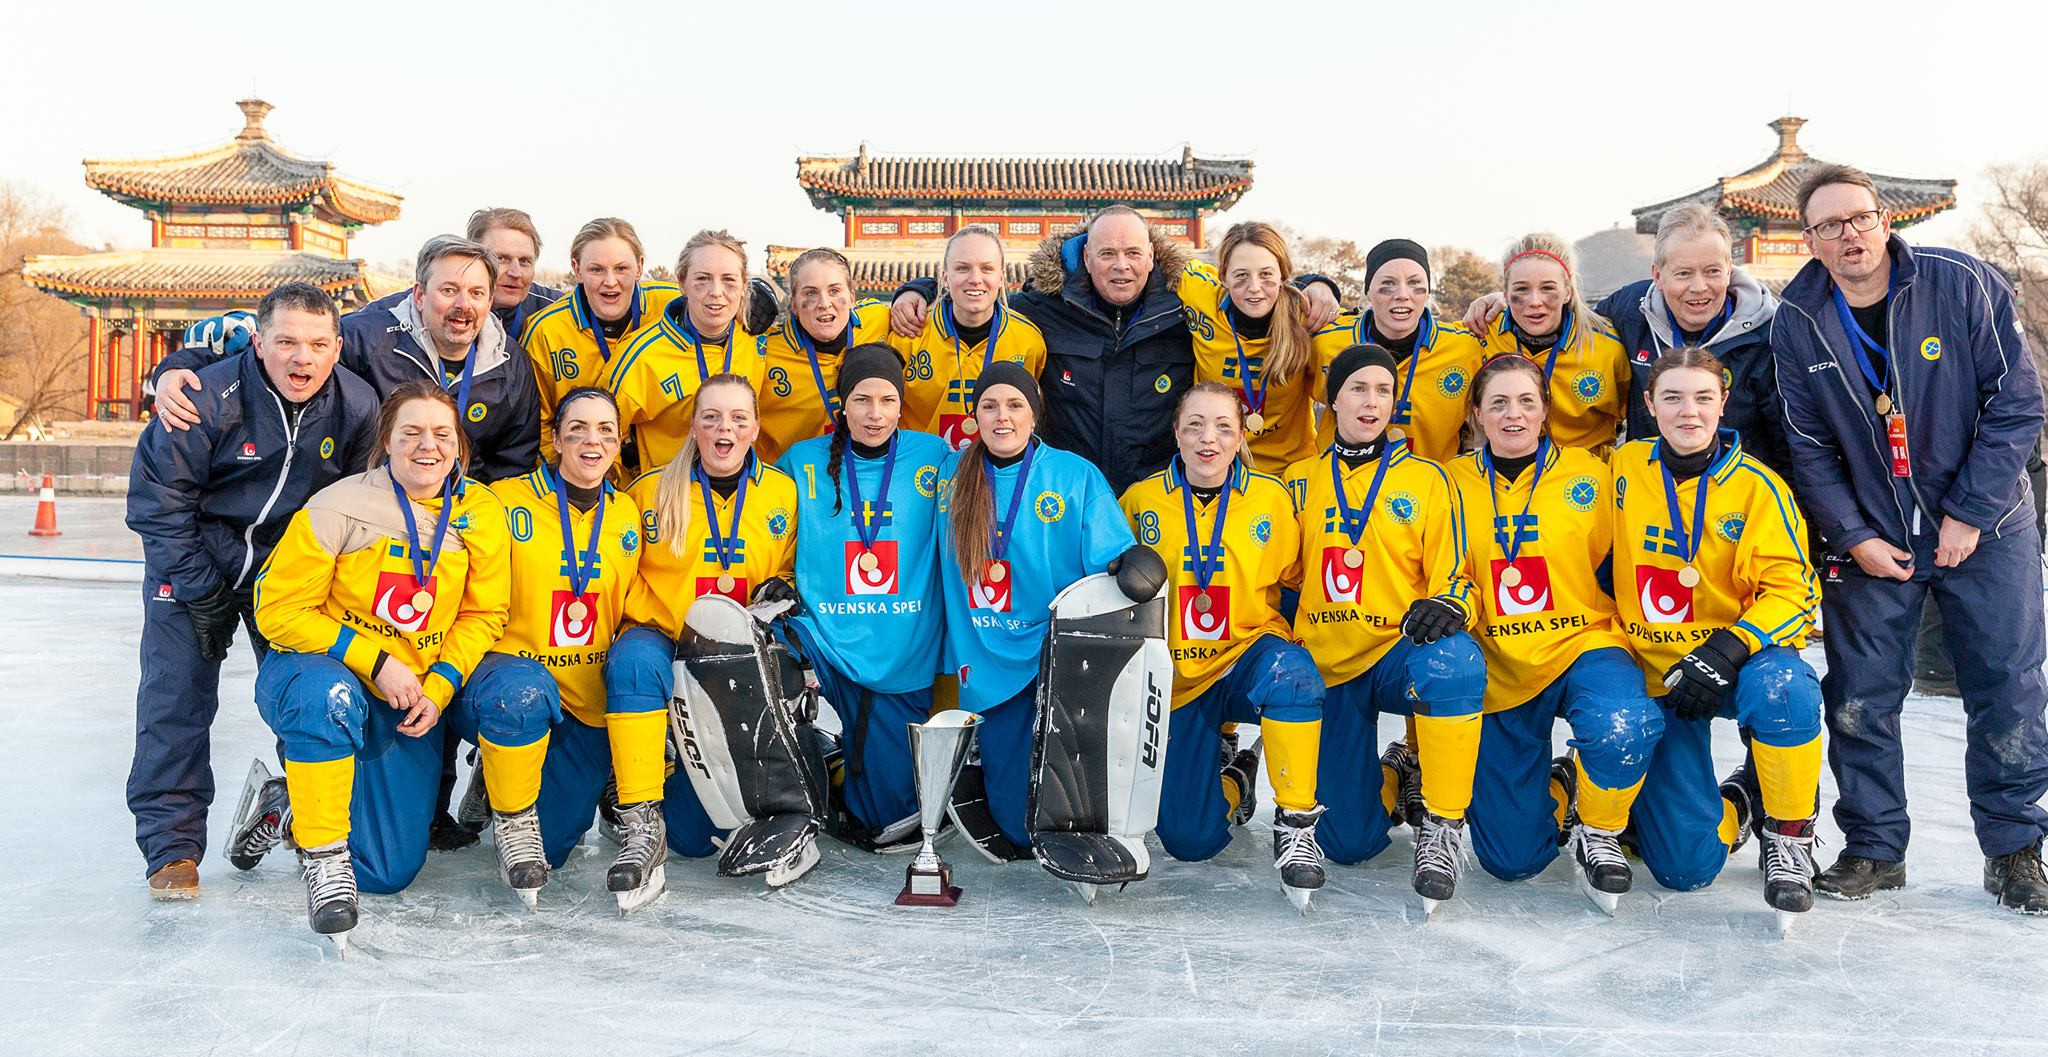 Sweden secure eighth Women’s World Bandy title after narrow victory over Russia